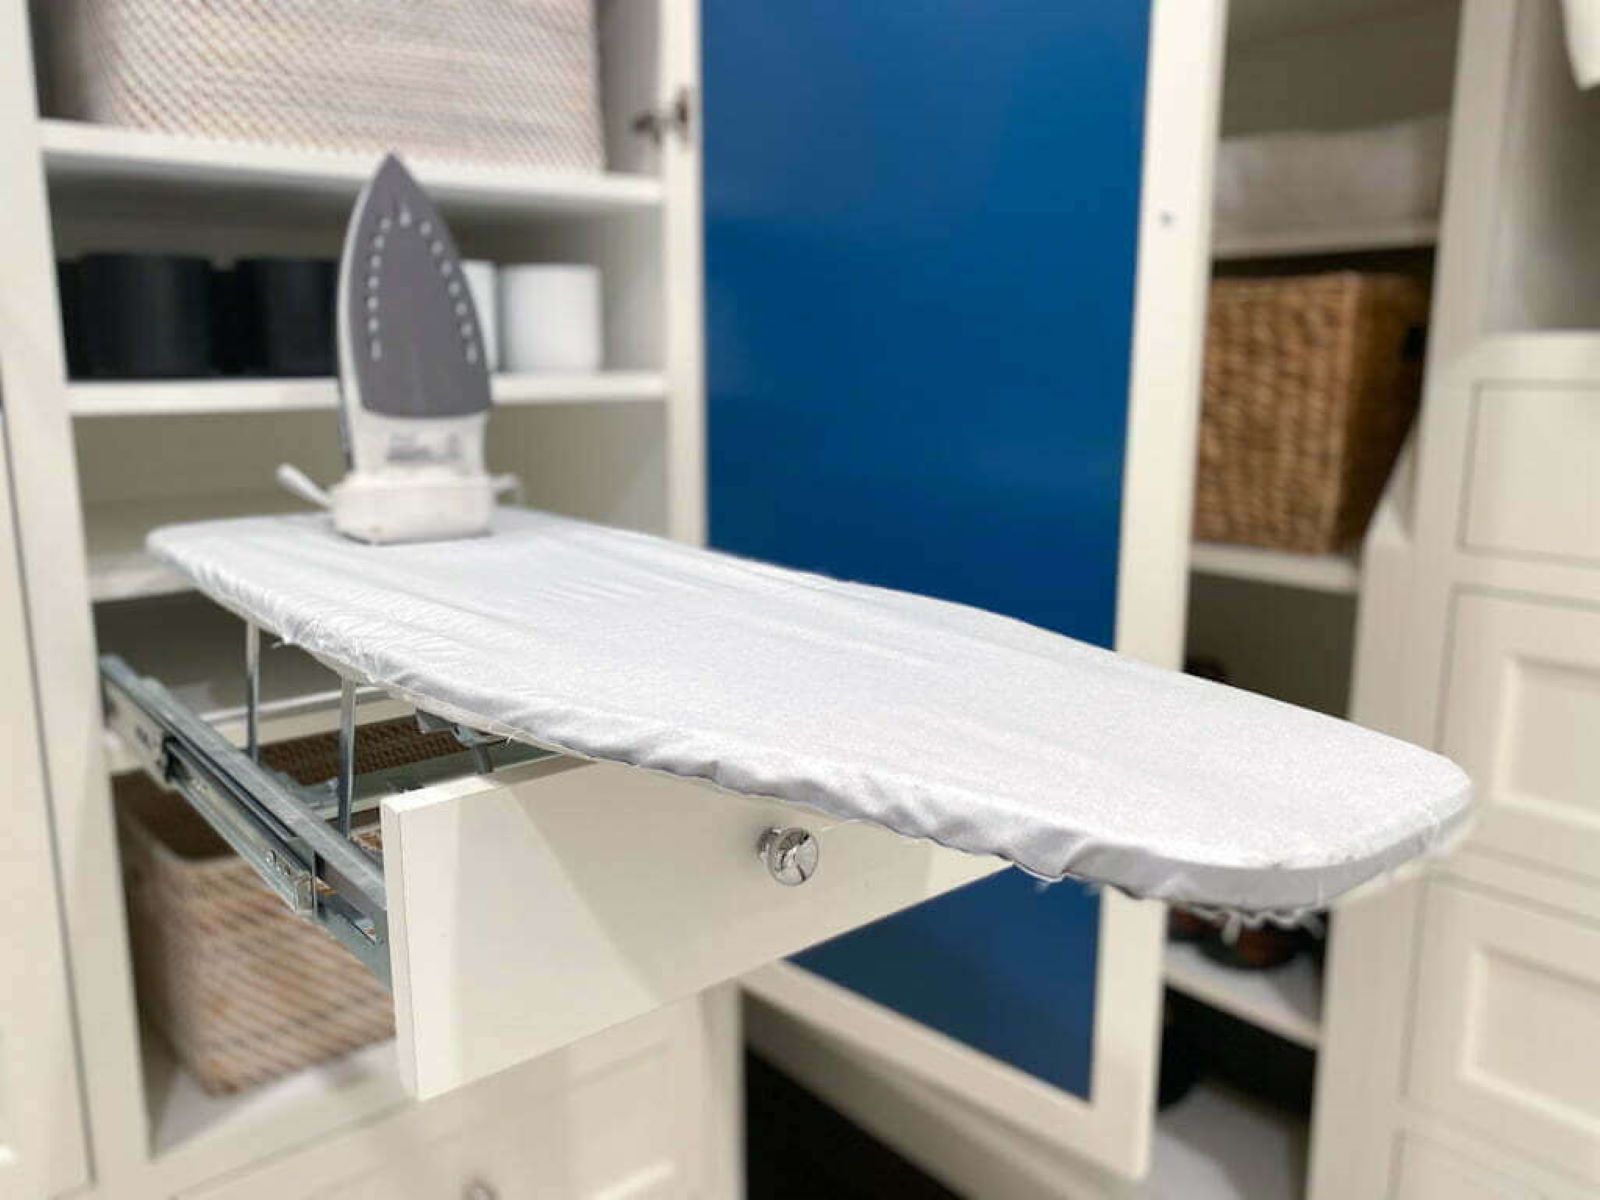 How To Put An Ironing Board Down